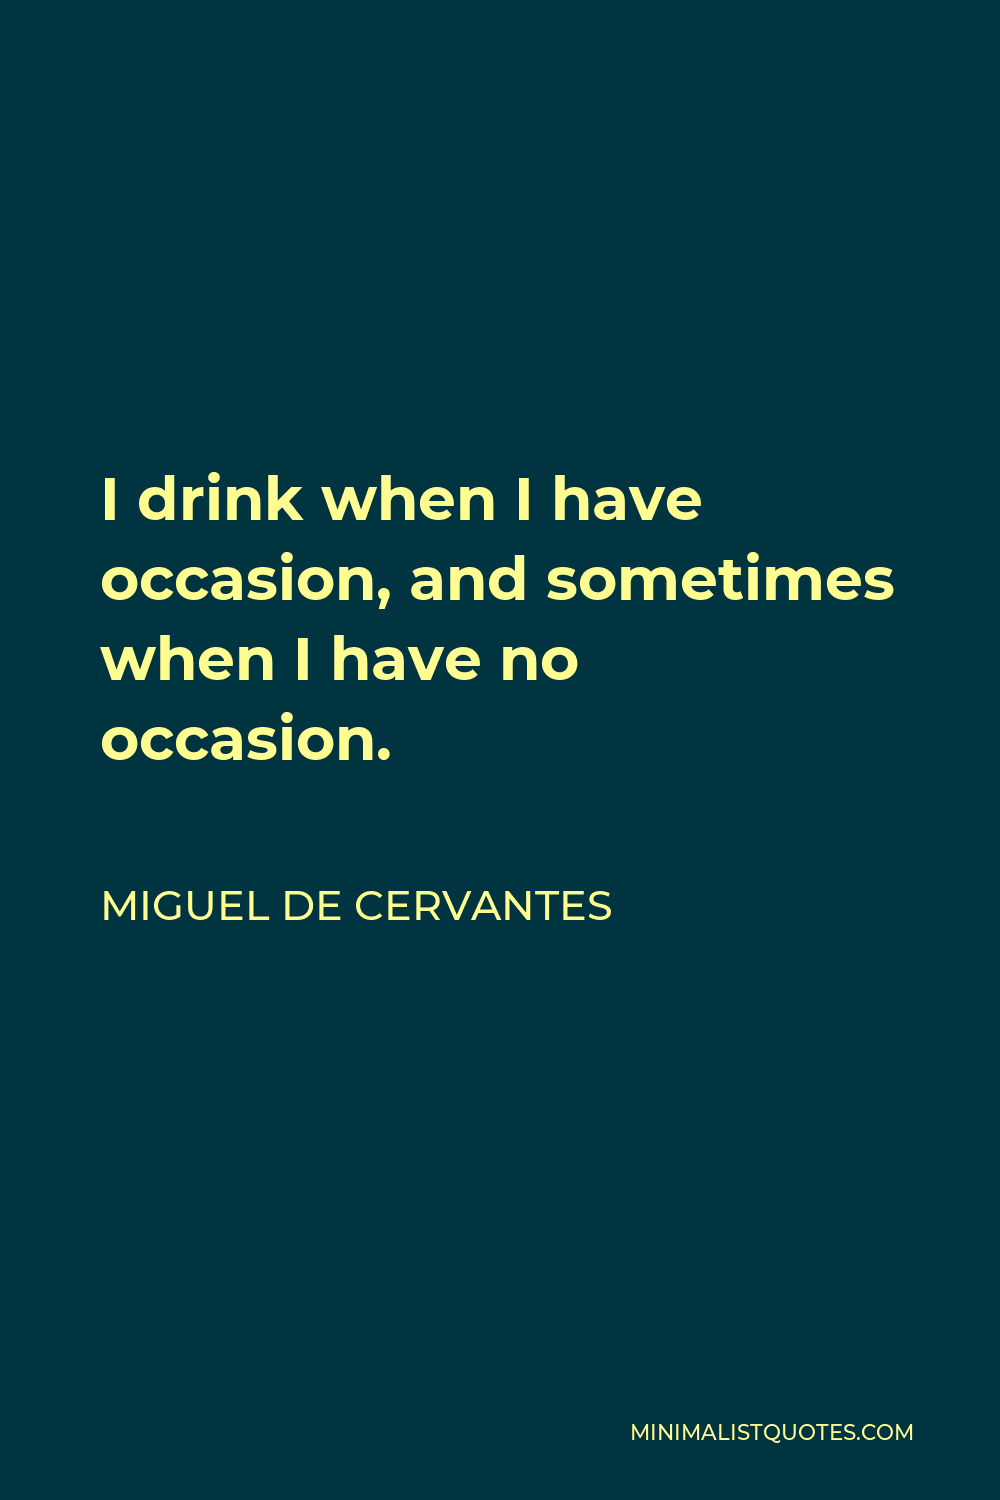 Miguel de Cervantes Quote - I drink when I have occasion, and sometimes when I have no occasion.